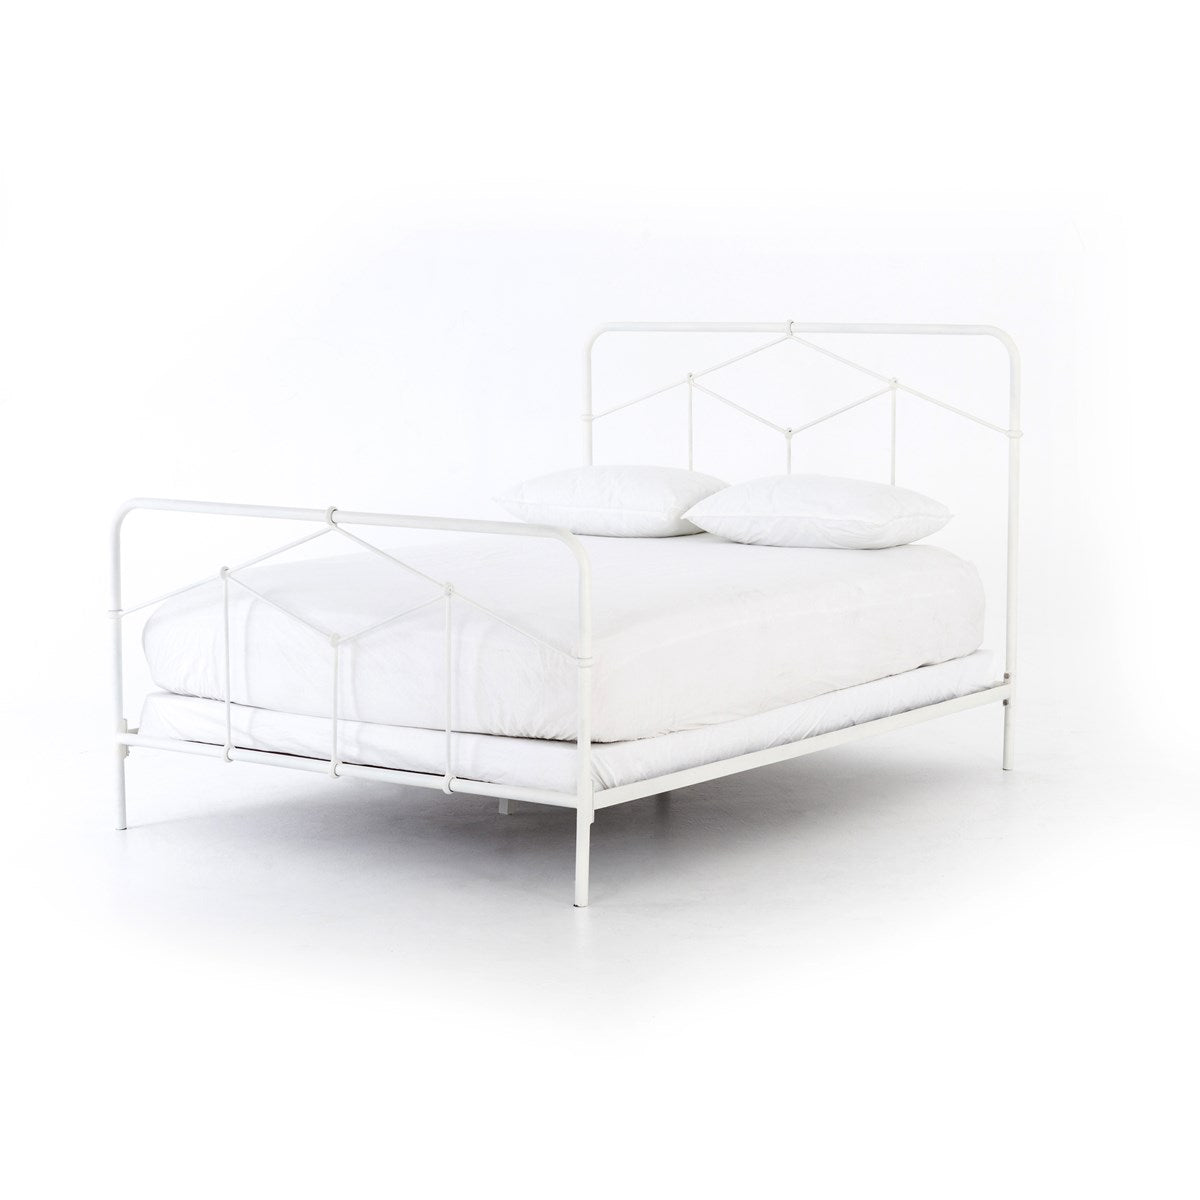 Casey Bed White / QueenBed Four Hands  White Queen  Four Hands, Burke Decor, Mid Century Modern Furniture, Old Bones Furniture Company, Old Bones Co, Modern Mid Century, Designer Furniture, https://www.oldbonesco.com/